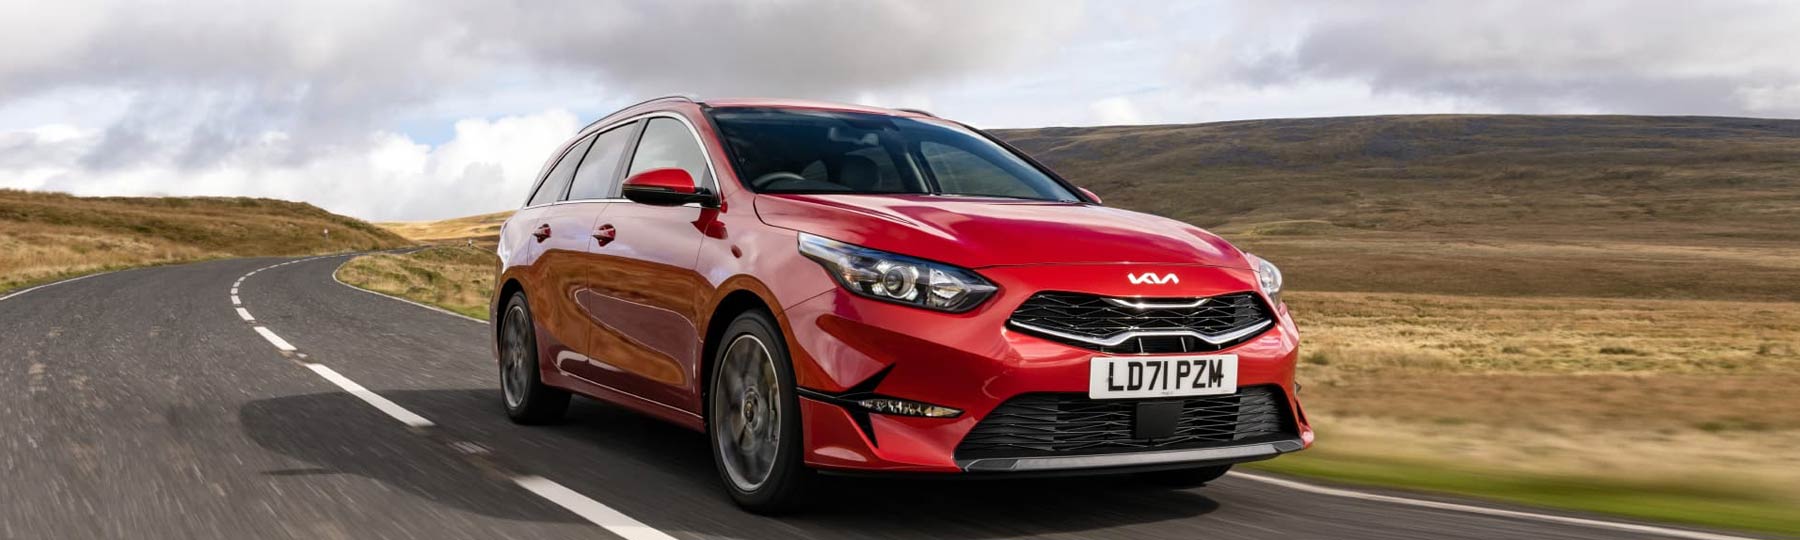 Kia Ceed SW Personal Contract Hire Offer